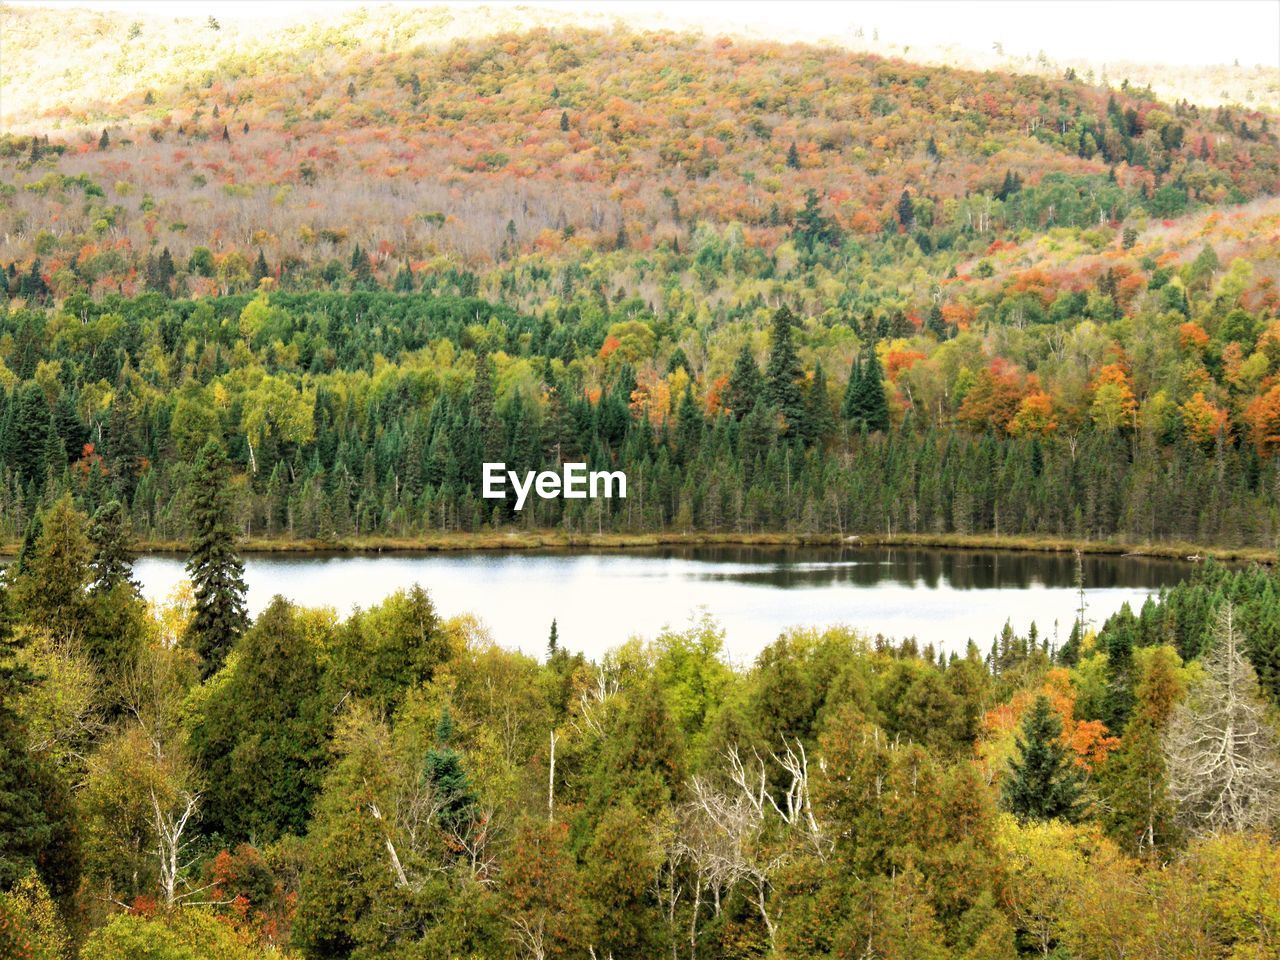 SCENIC VIEW OF LAKE DURING AUTUMN TREES